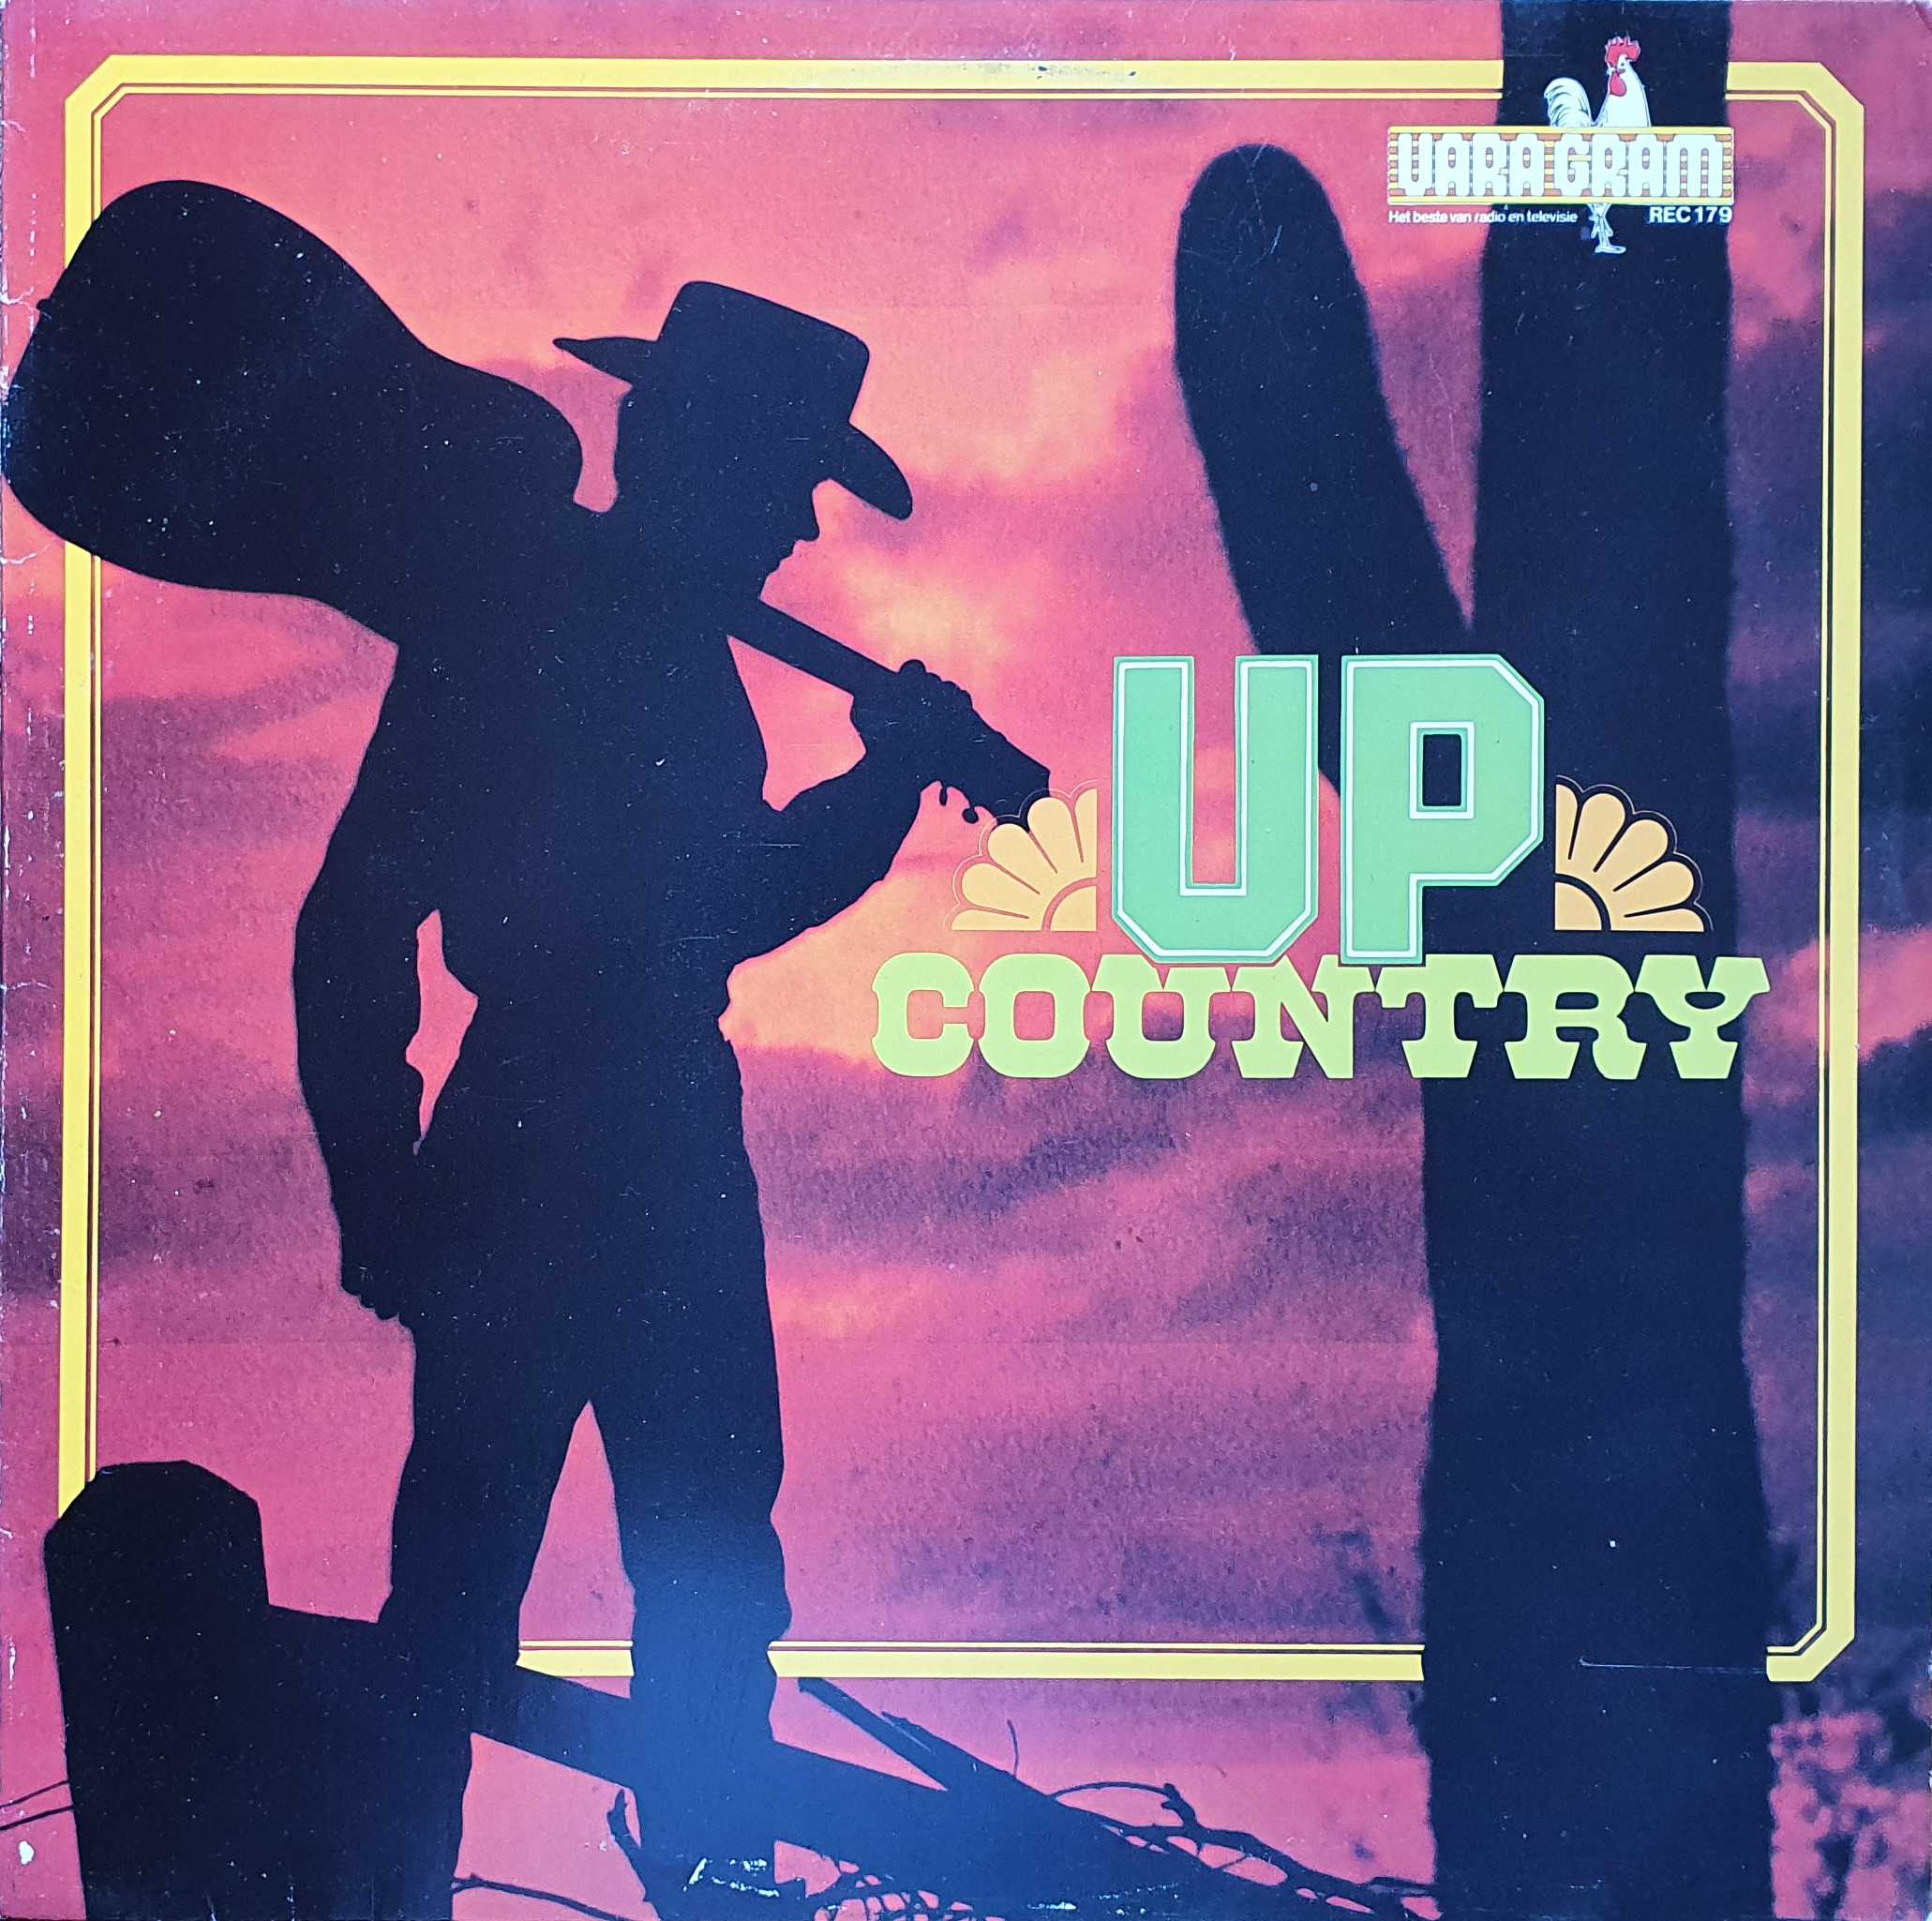 Picture of REC 179-iD Up country by artist Various from the BBC albums - Records and Tapes library